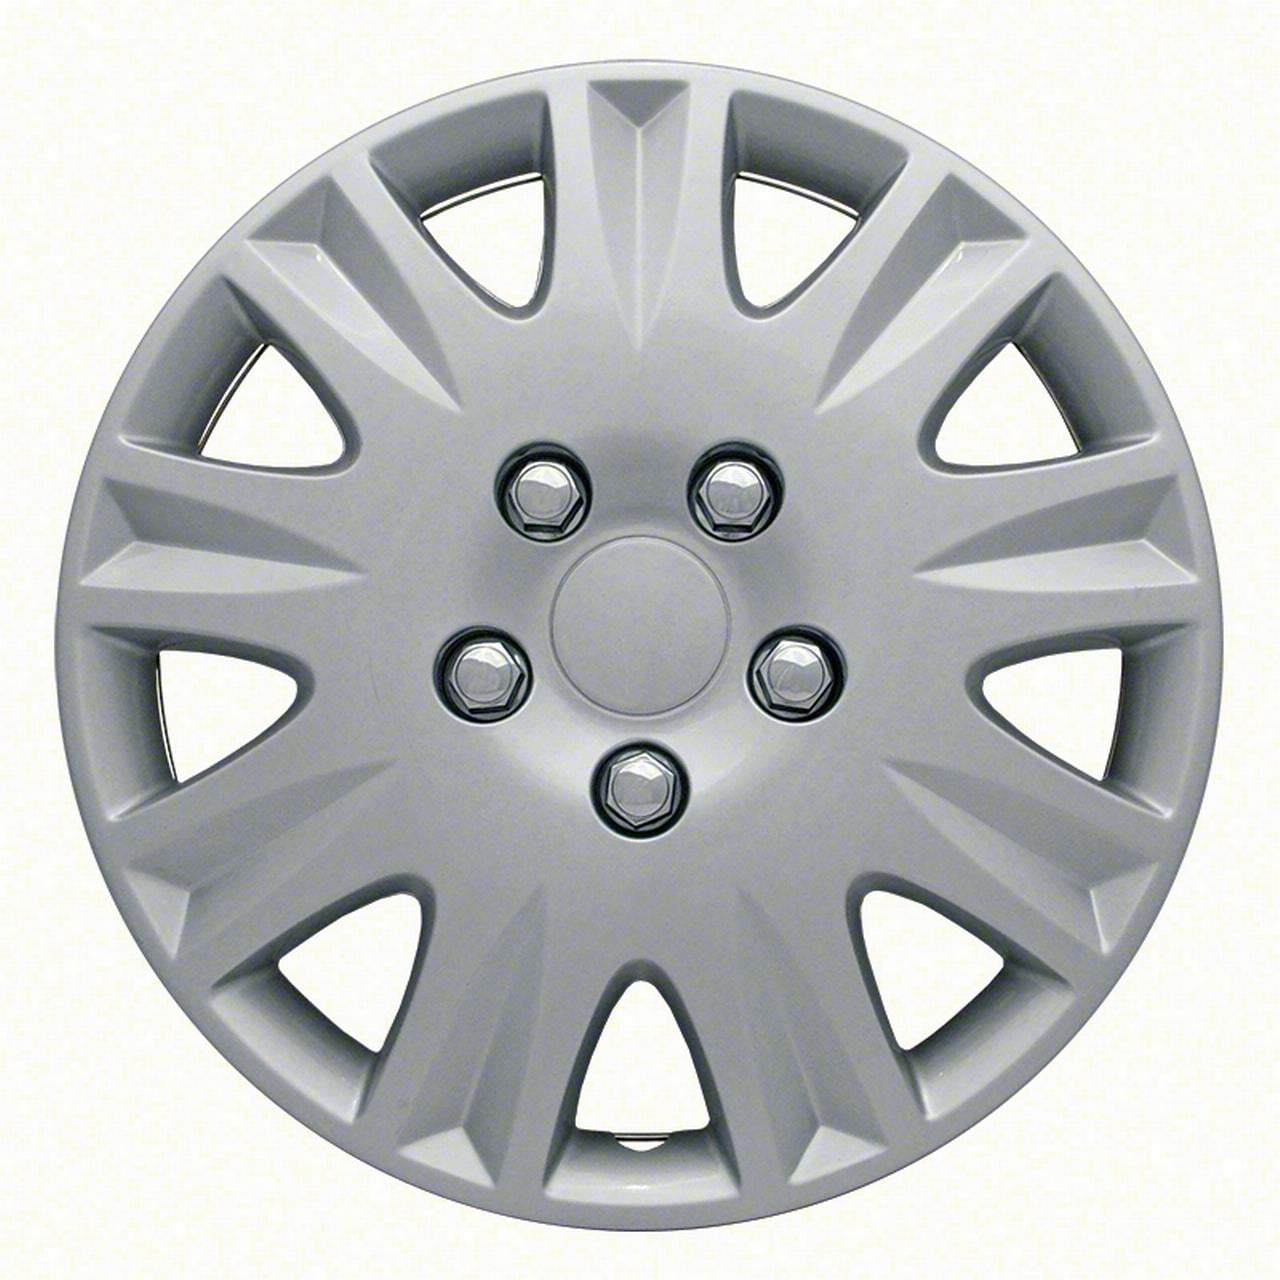 16" Wheel trims fit Mercedes Sprinter II   wheel covers 16 inches silver 